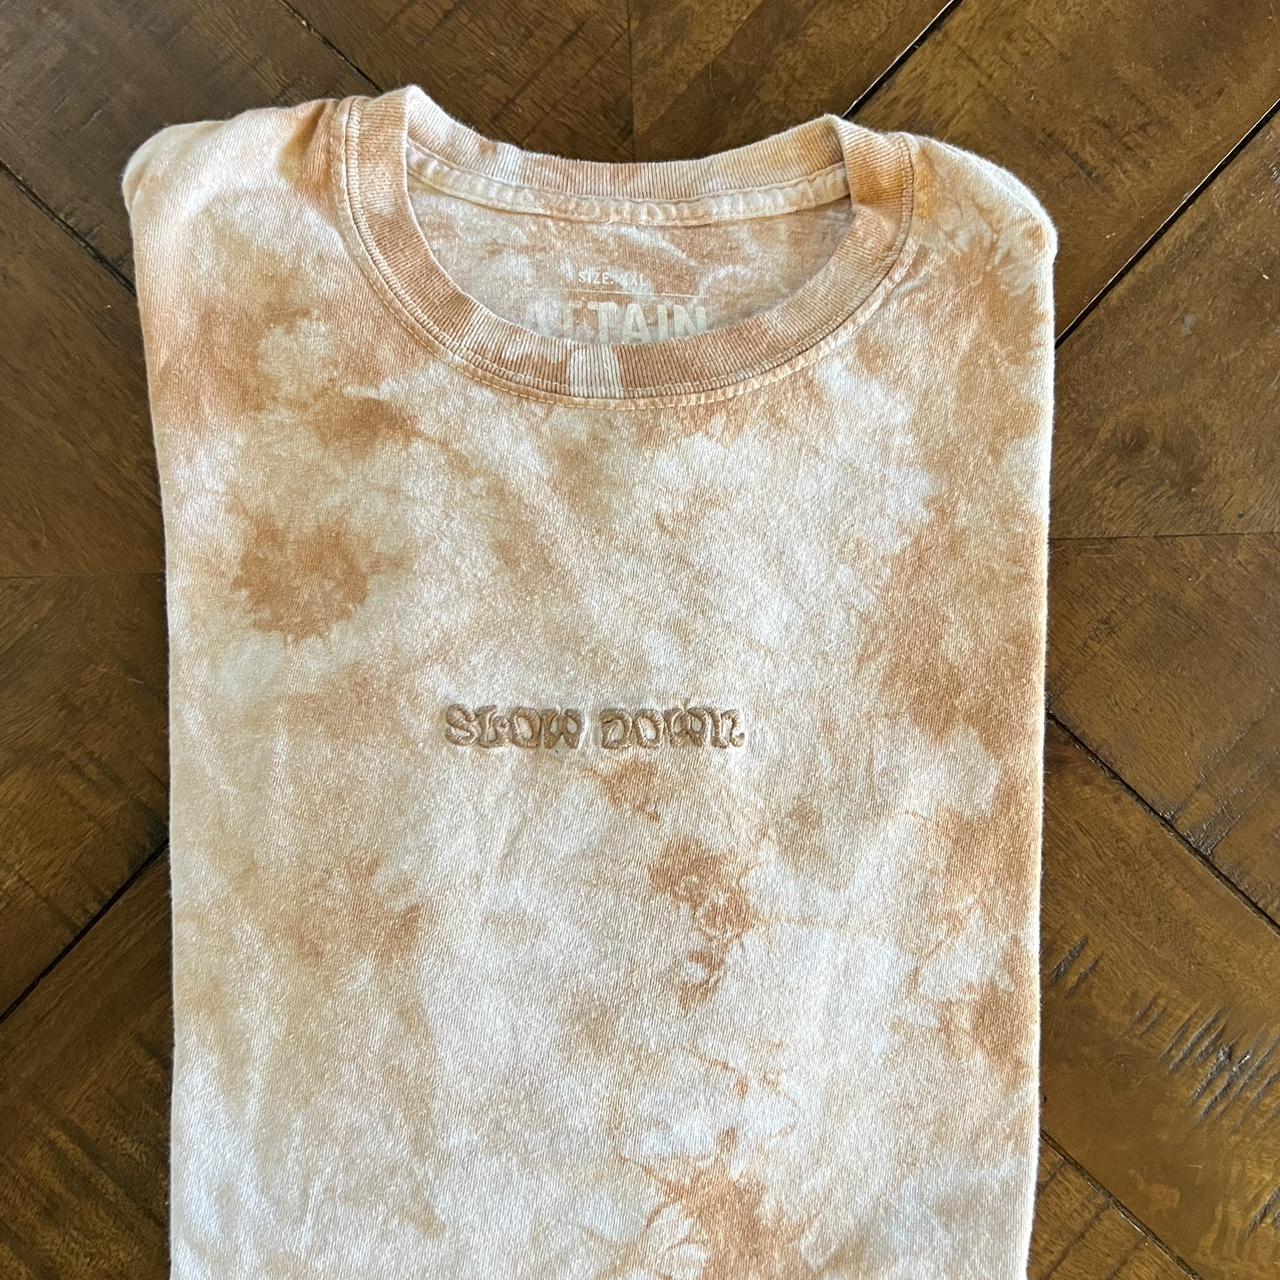 Urban Outfitters Men's T-shirt